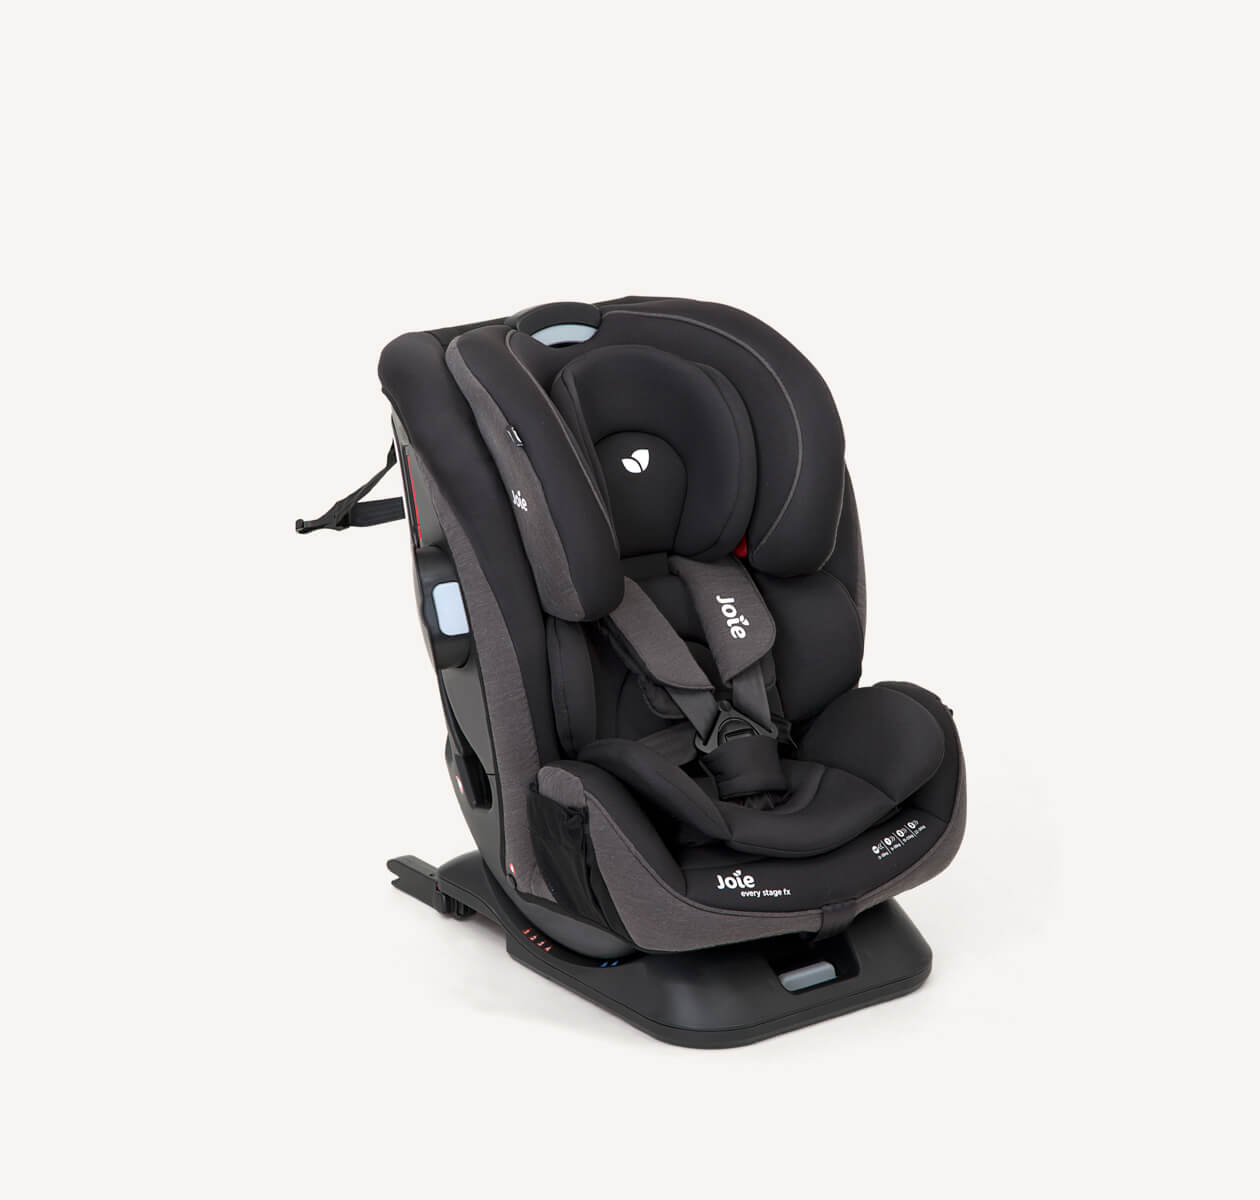  The Joie Every Stage FX car seat in a black and gray colour with 5-point harness and infant insert, at an angle.